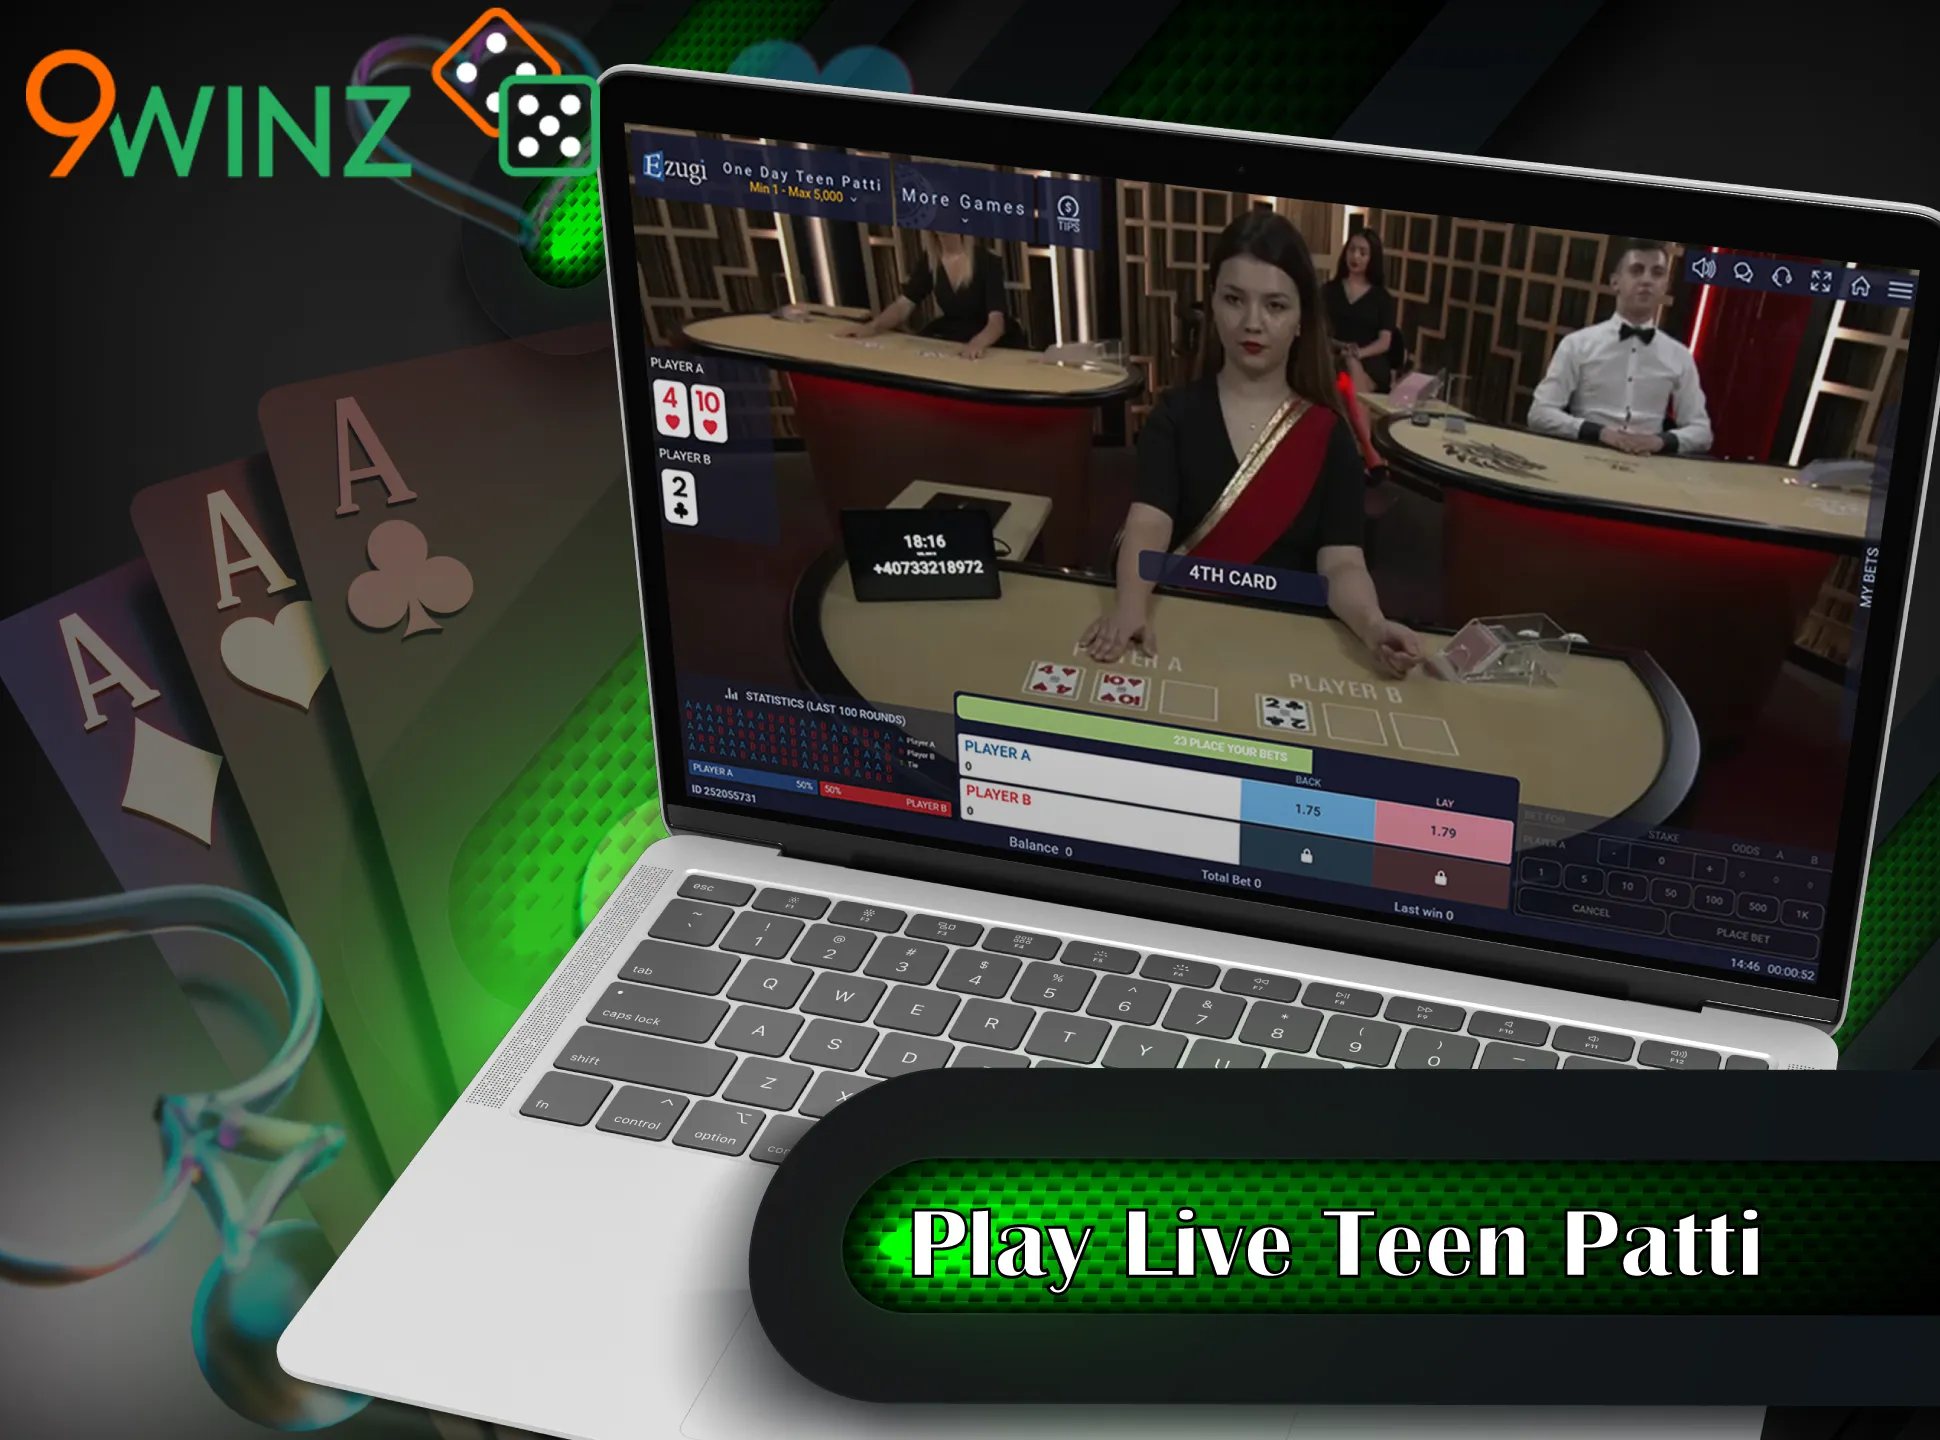 Live Teen Patti means that you will play against the real dealer.